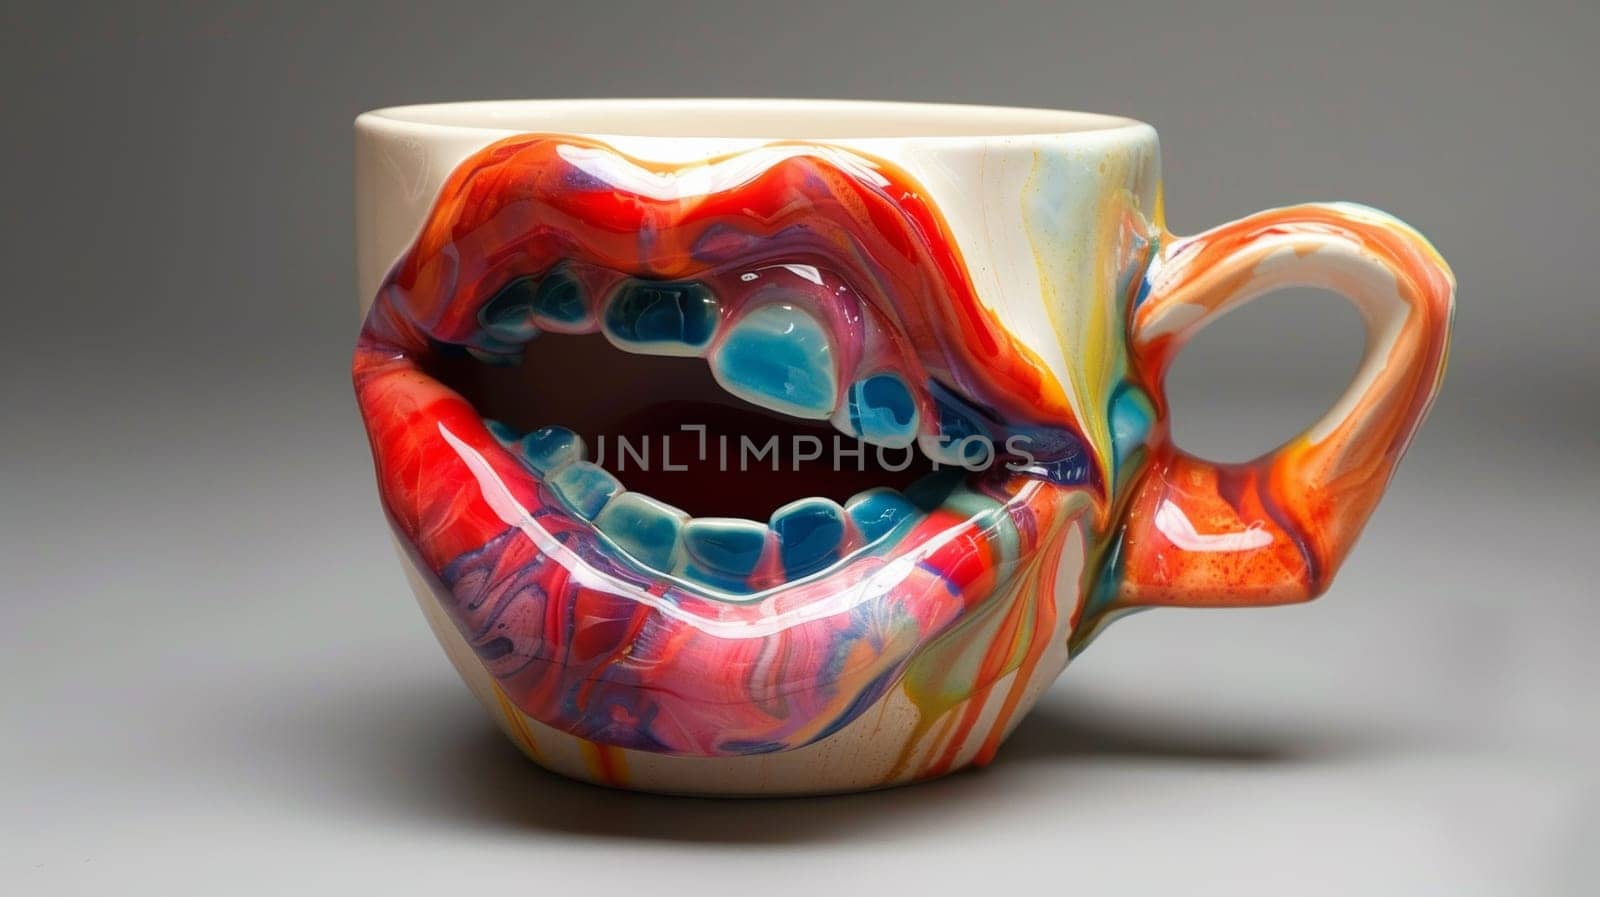 A colorful coffee mug with a mouth painted on it